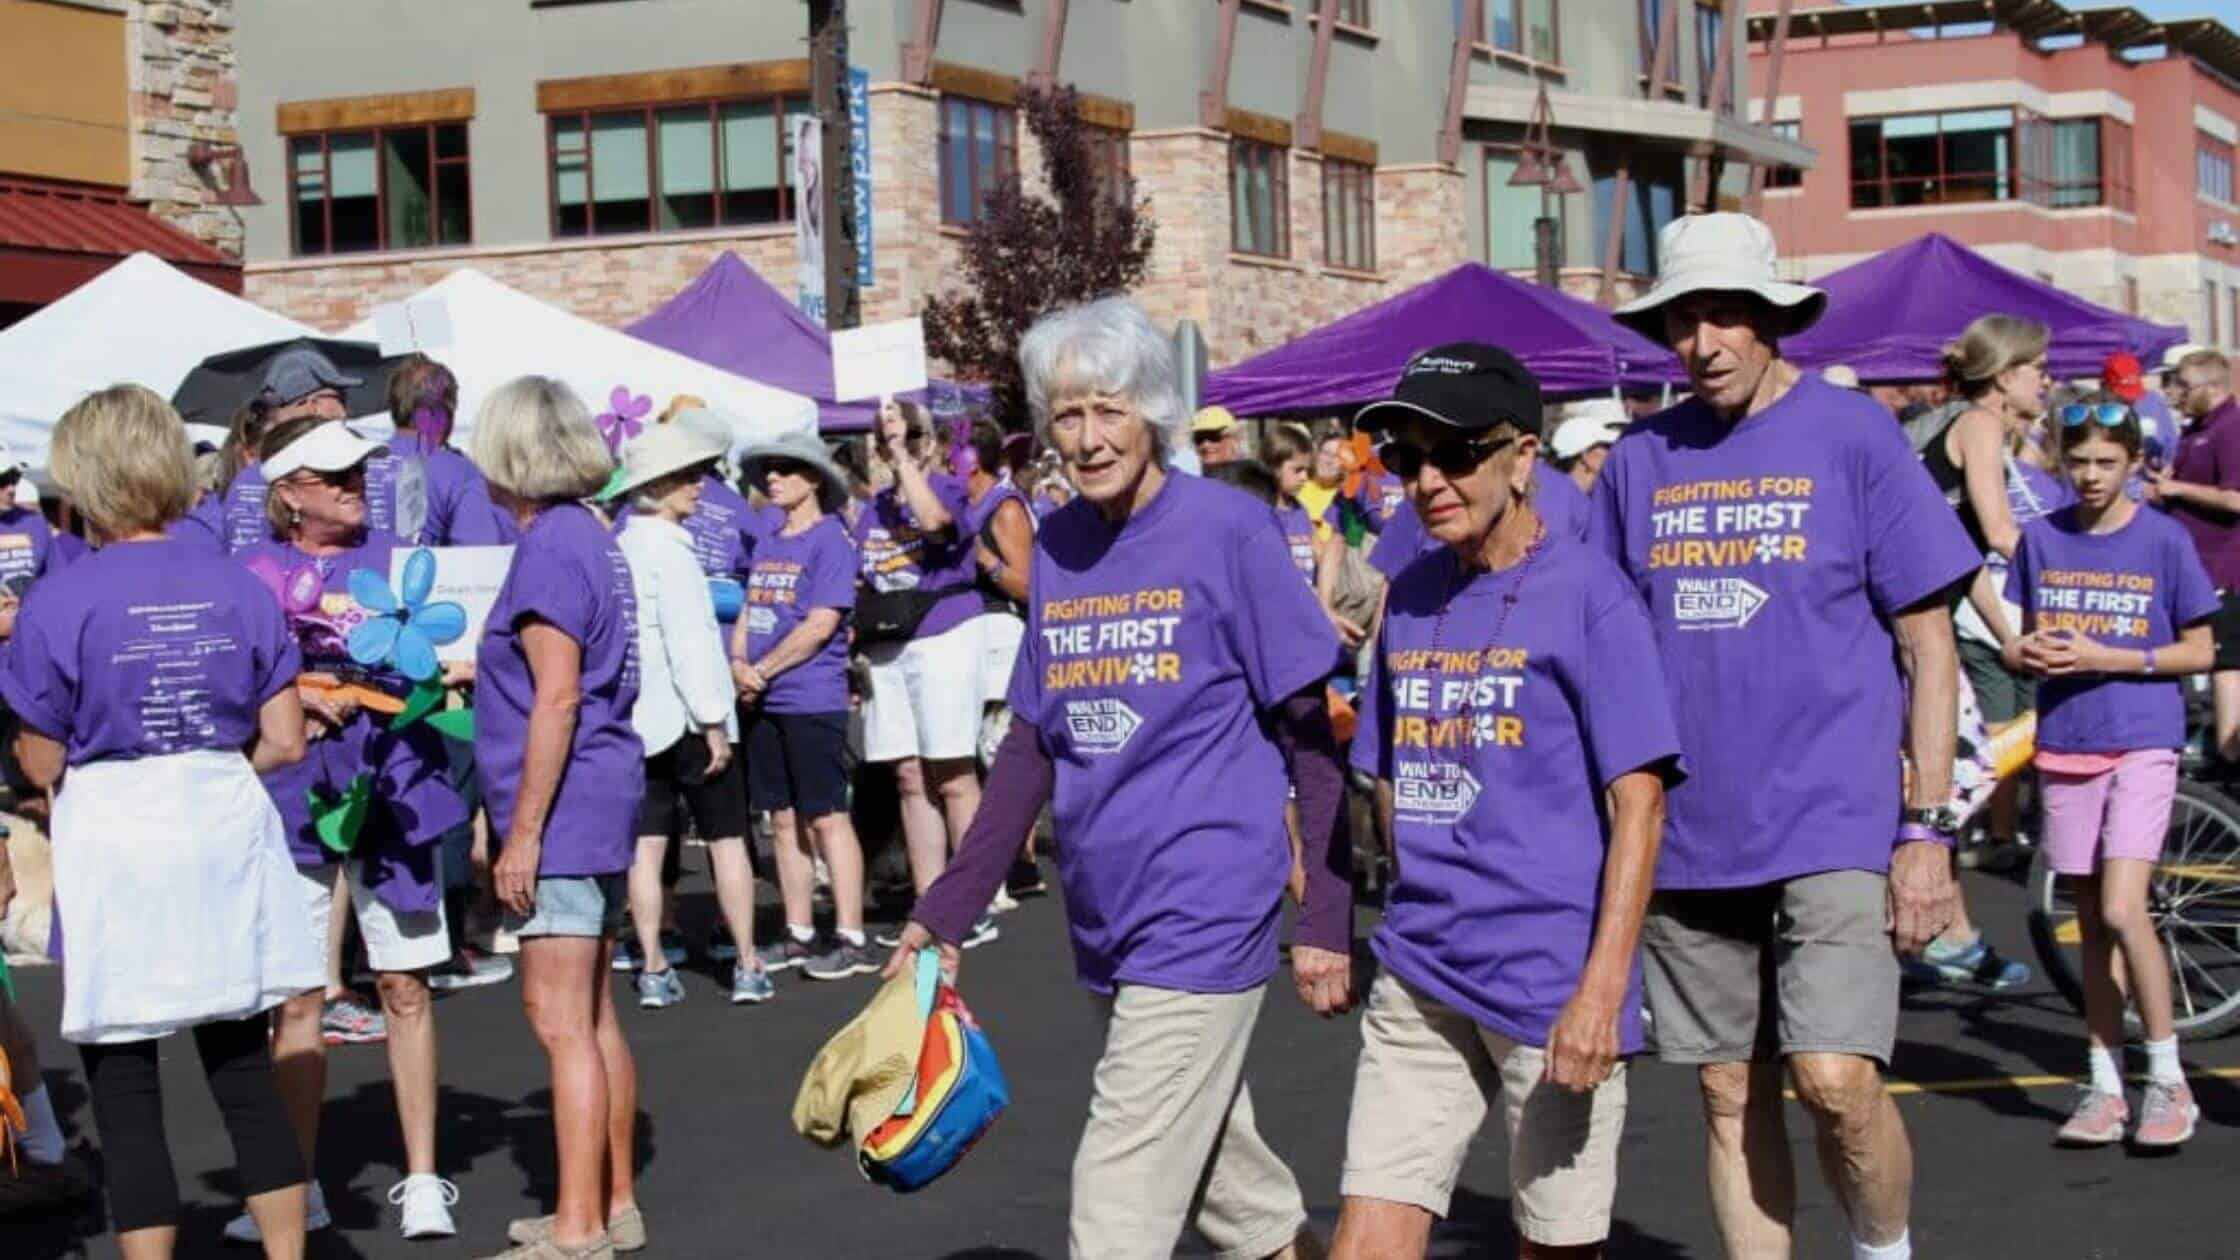 2022 walk to end Alzheimer's: What Is The Intention Behind In This?